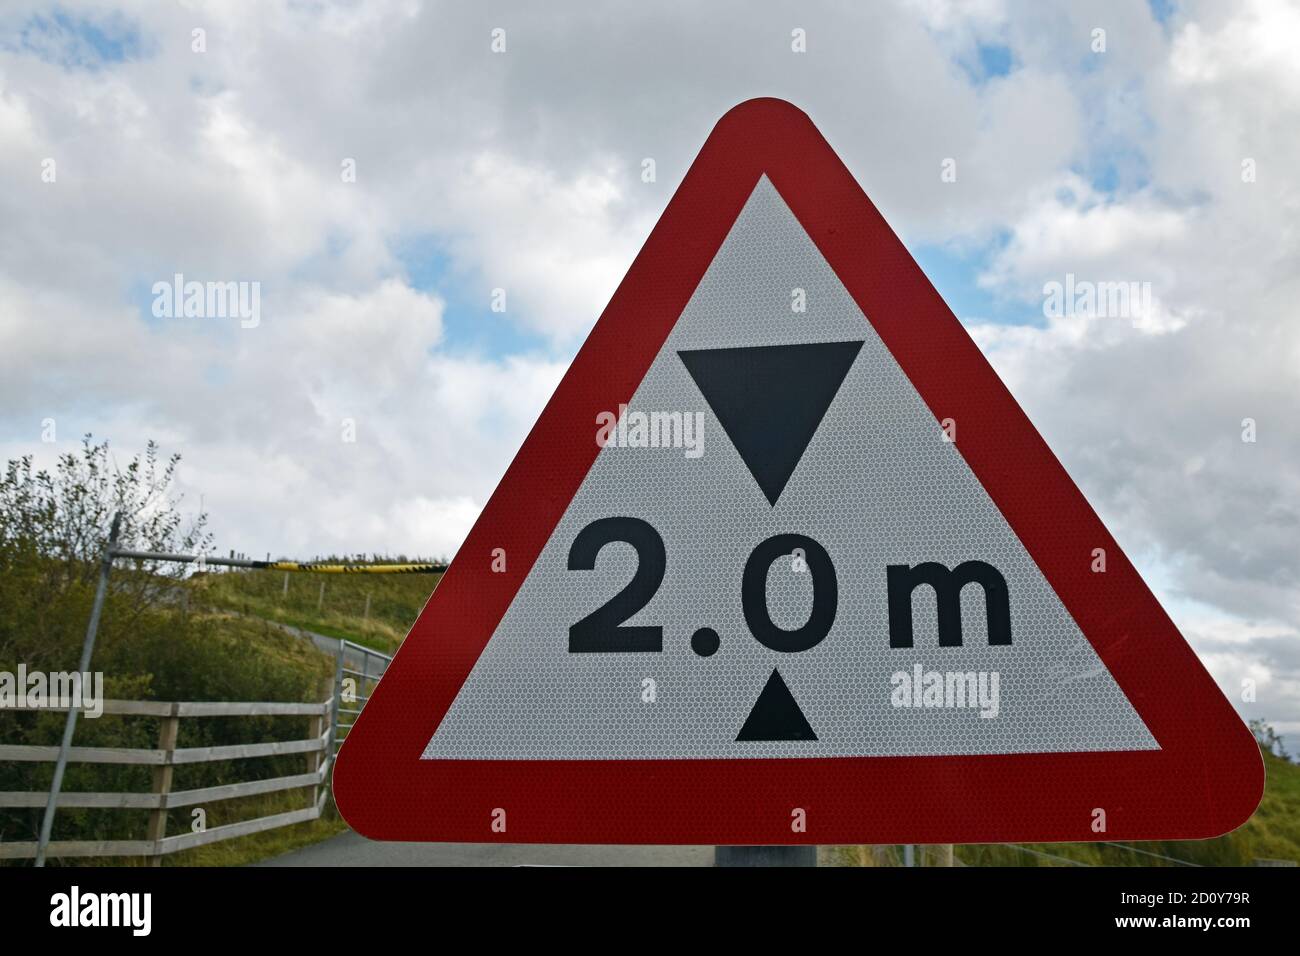 Two metre height restriction sign in red warning triangle with blurred barrier in background. Isle of Skye, Scotland, UK. Stock Photo